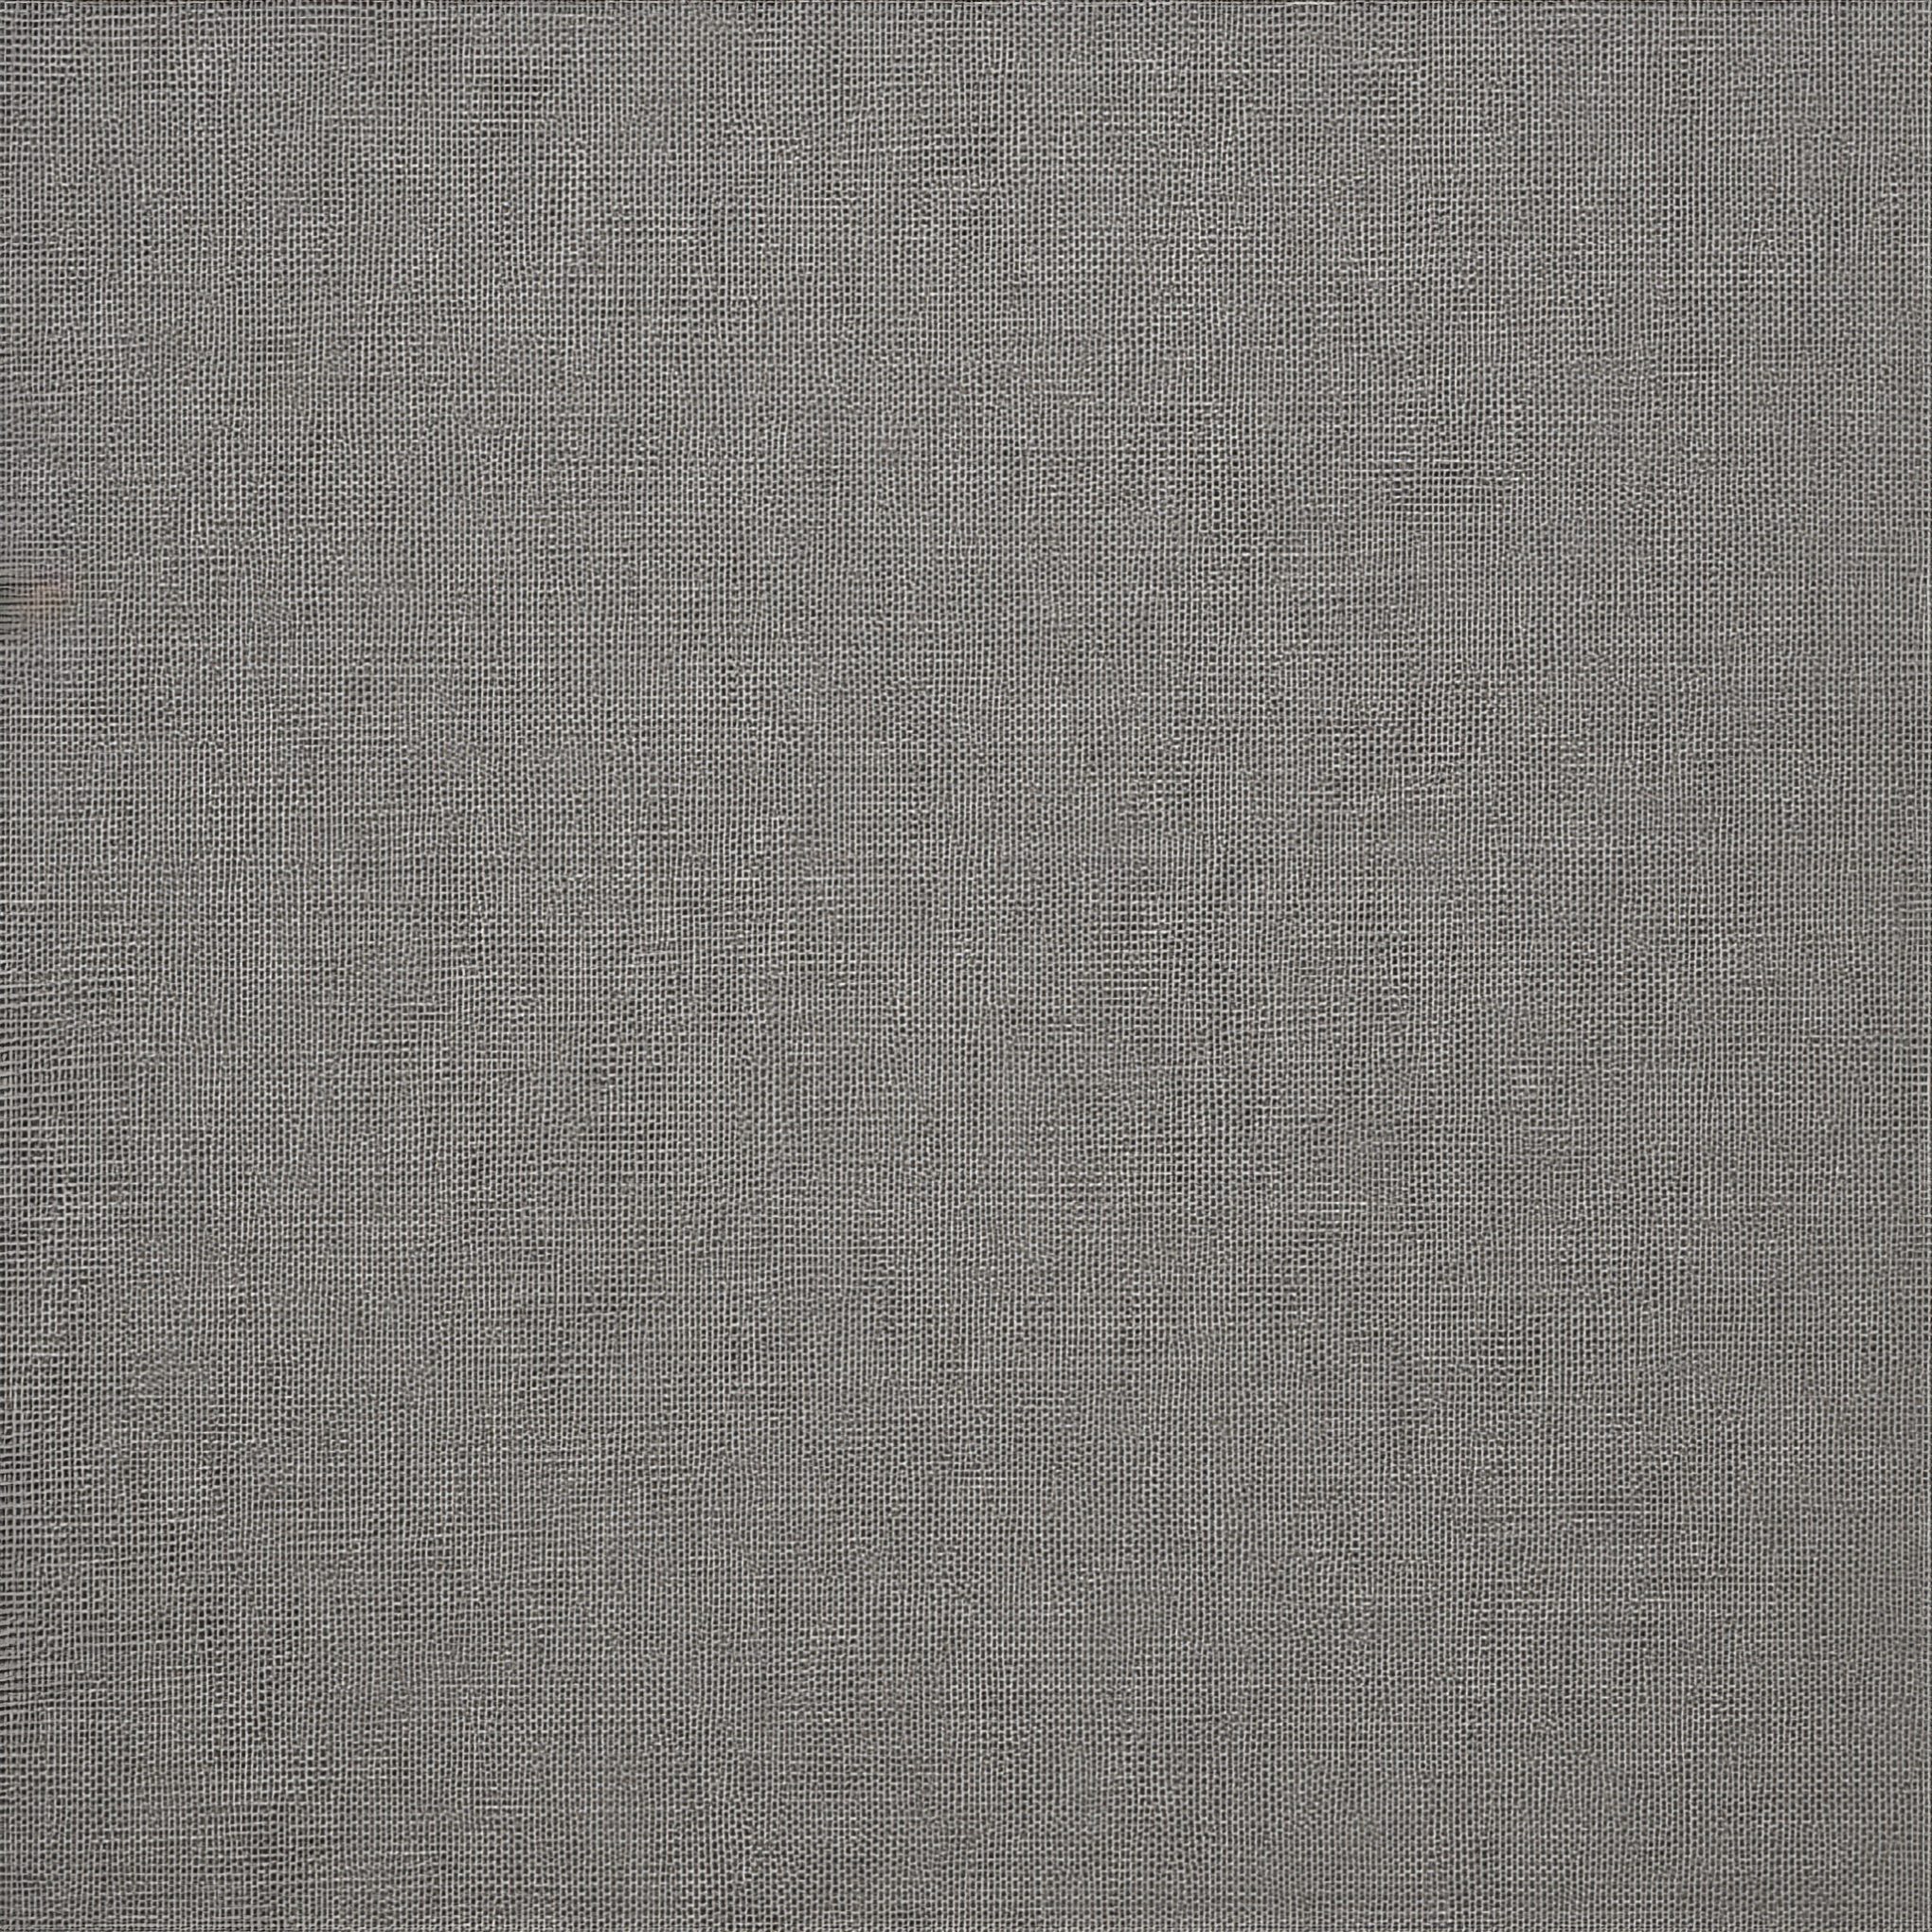 Woven Linen Material Fabric Grey Free Stock Image